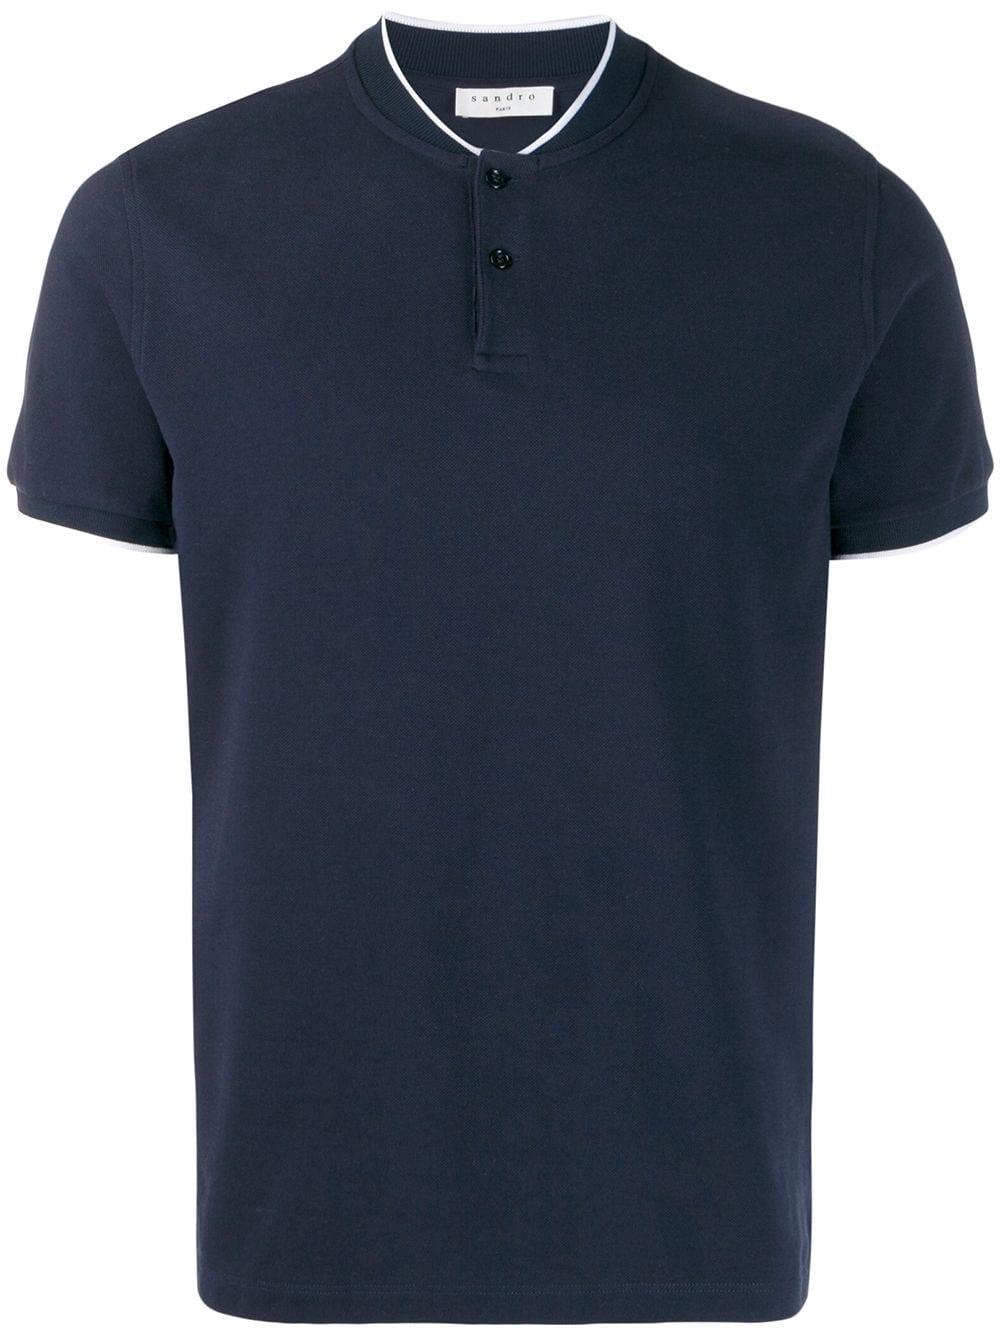 Sandro Cotton Round Neck Polo Shirt in Blue for Men - Lyst